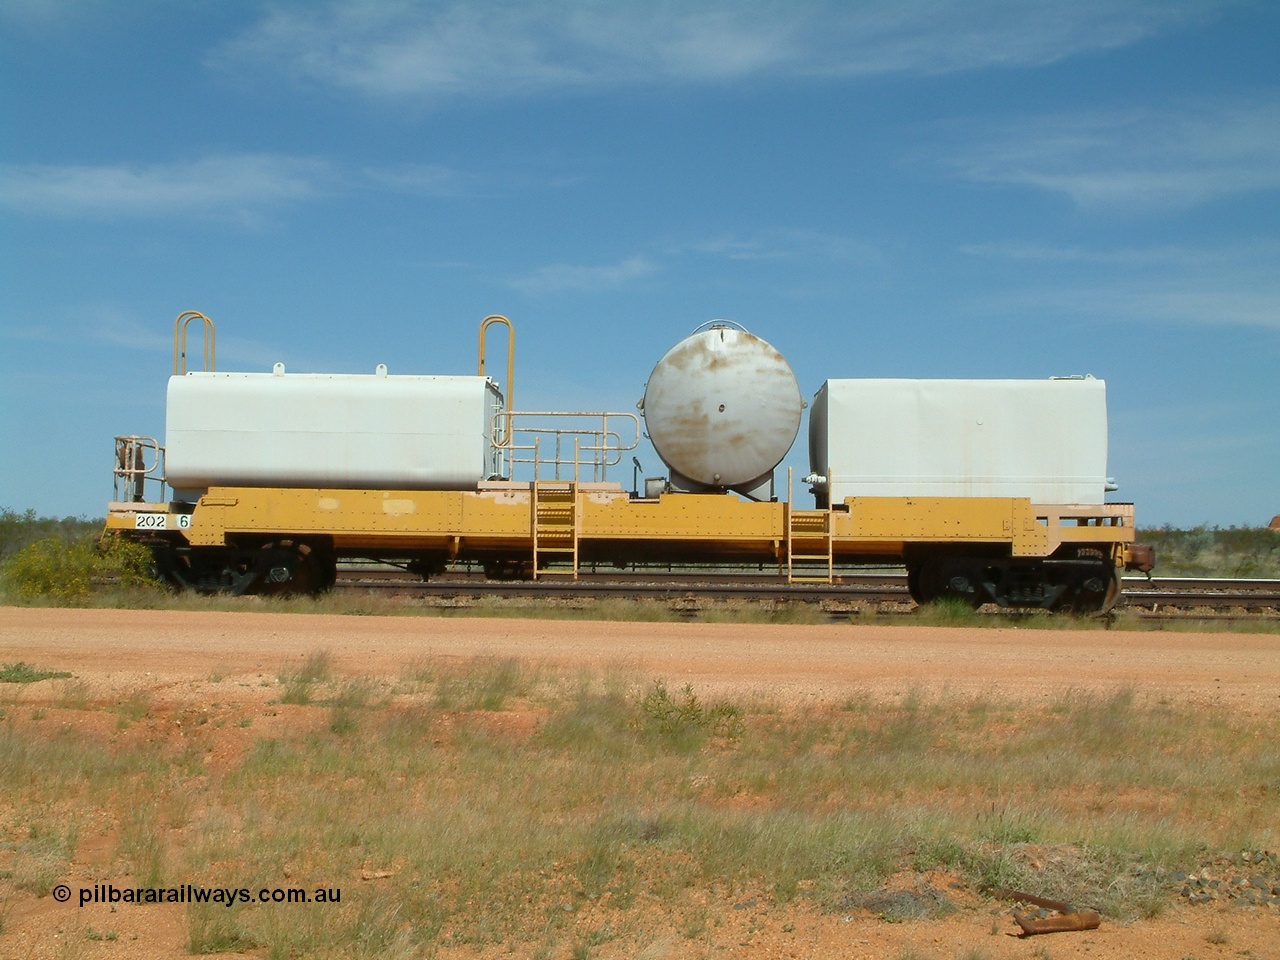 040419 102309
Abydos back track, riveted flat waggon 202 with three water tanks fitted, side view, shows access ladder profiles, originally part of the 'camp train', modified by Mt Newman Mining railway workshops.
Keywords: BHP-flat-waggon;